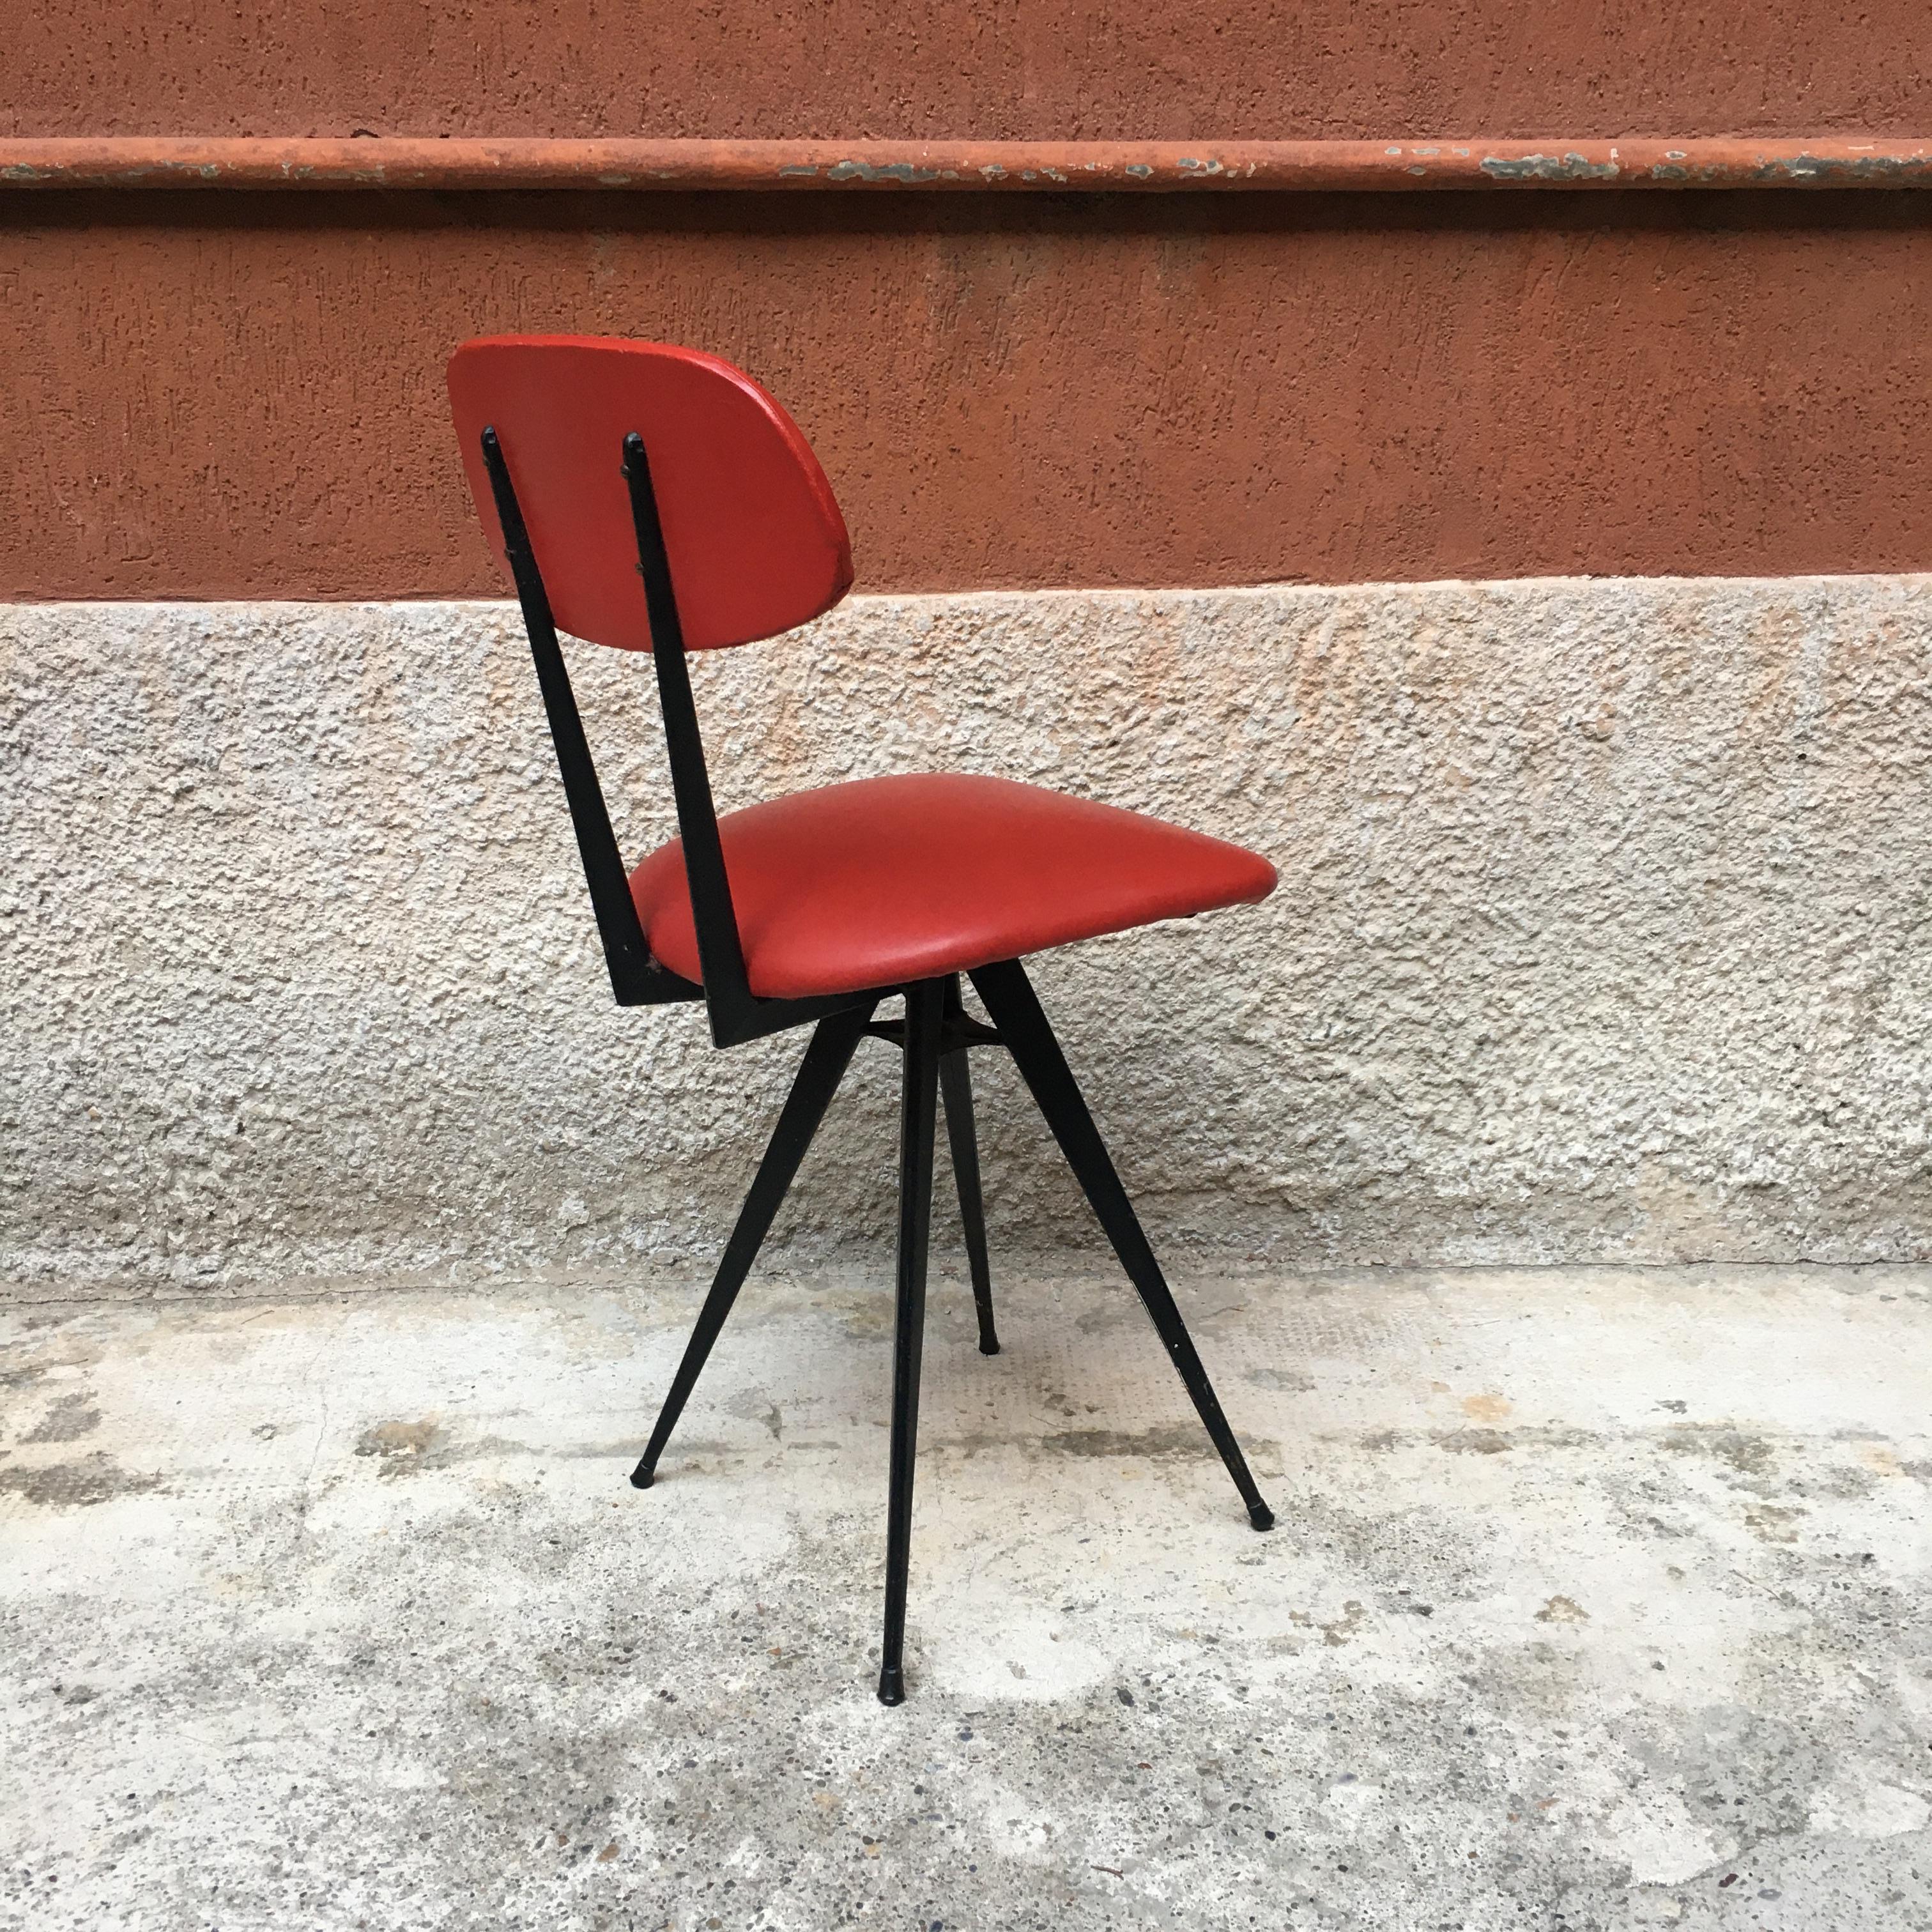 Mid-Century Modern Italian Red Leatherette and Metal Legs Chairs, 1960s